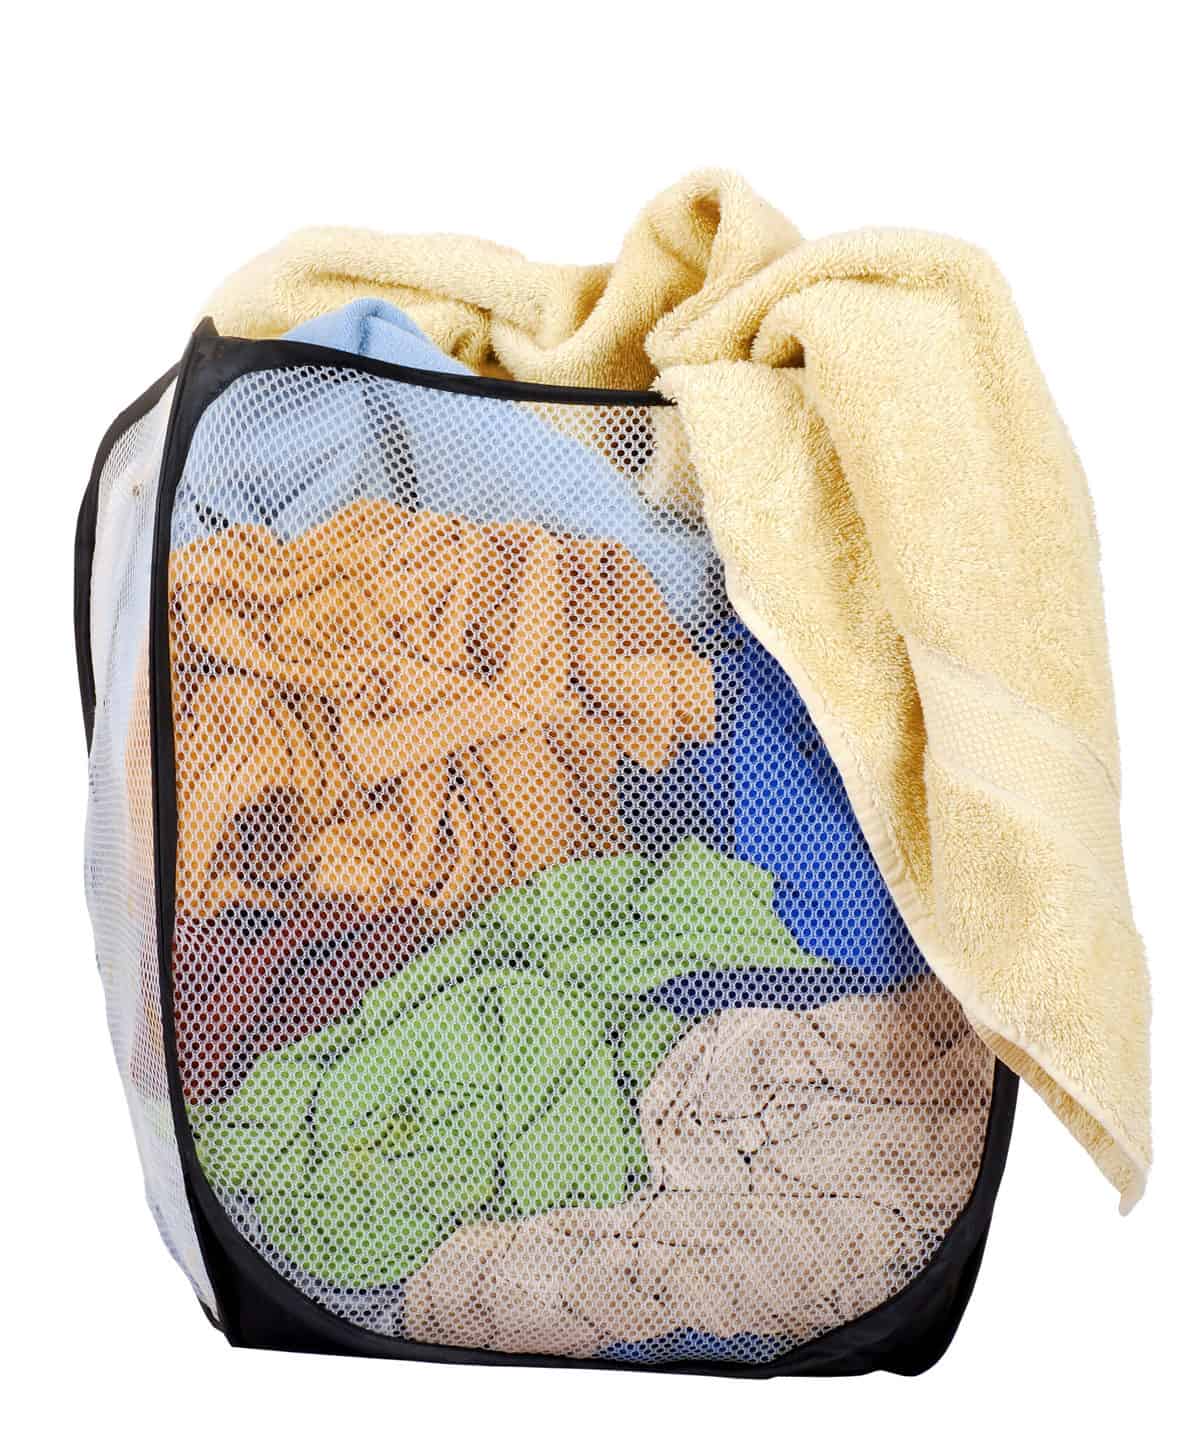 Photograph of a white mesh clothes hamper with black trim. The hamper is full of cloth/clothing of a discernible type from the bottom to the top there is some light beige cloth on top of which is some sage green royal blue there’s some maroon cough and then a lot of gold cloth and then hanging out of the hamper is a bath towel that is wheat colored or light yellow. Photograph is sit against white isolate.